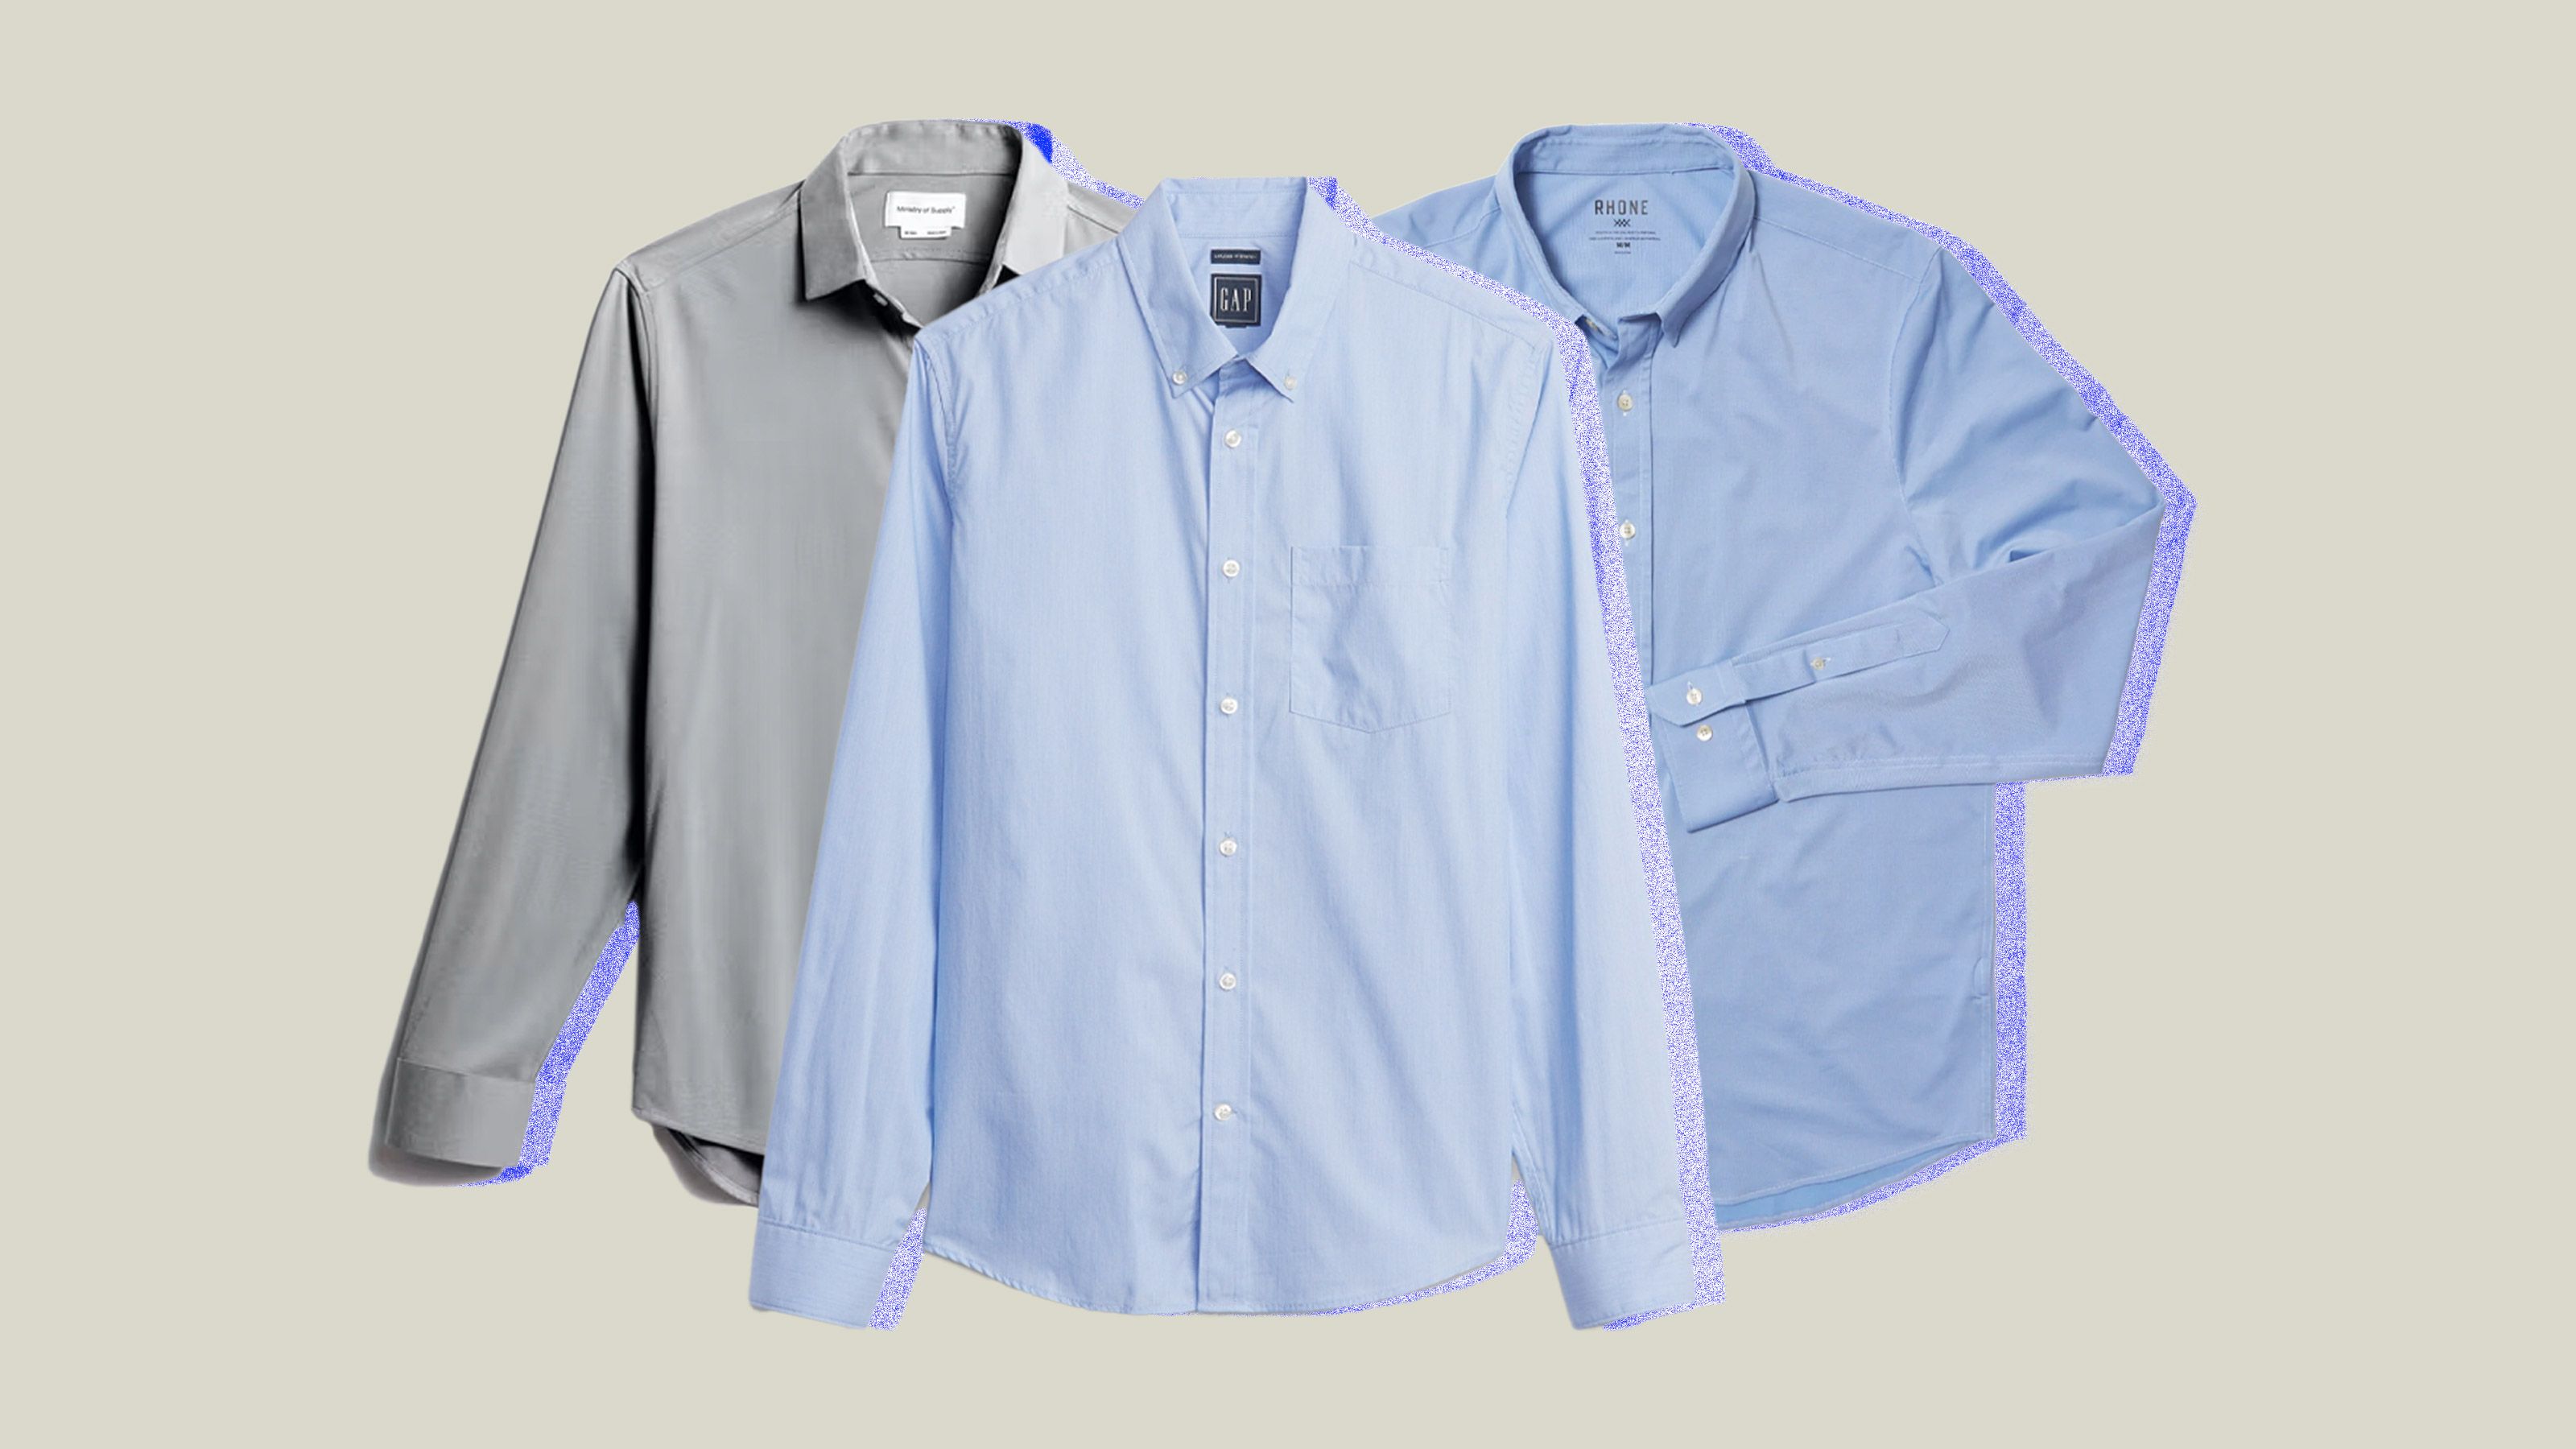 Expansion Passerby repetition The Best Performance Dress Shirts